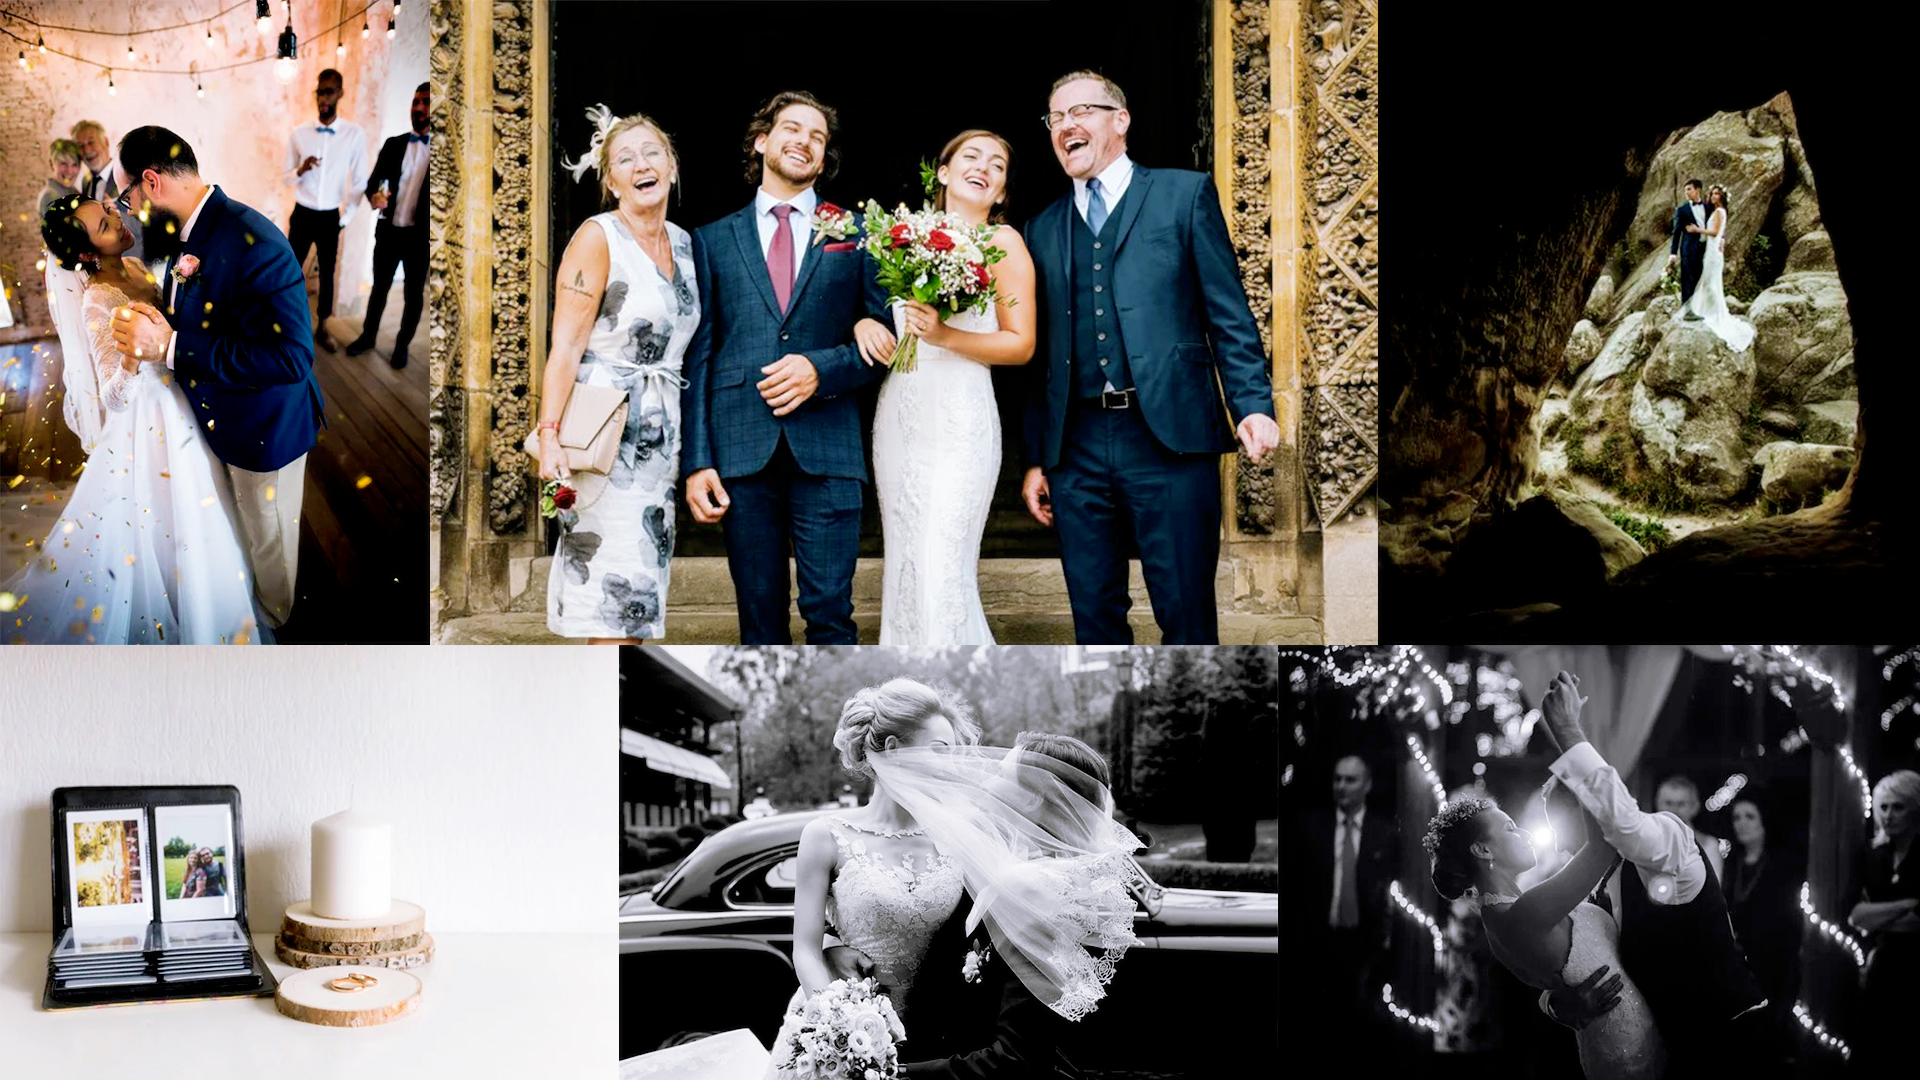 7 Most Common Wedding Photography Styles And Why Do You Need To Choose One